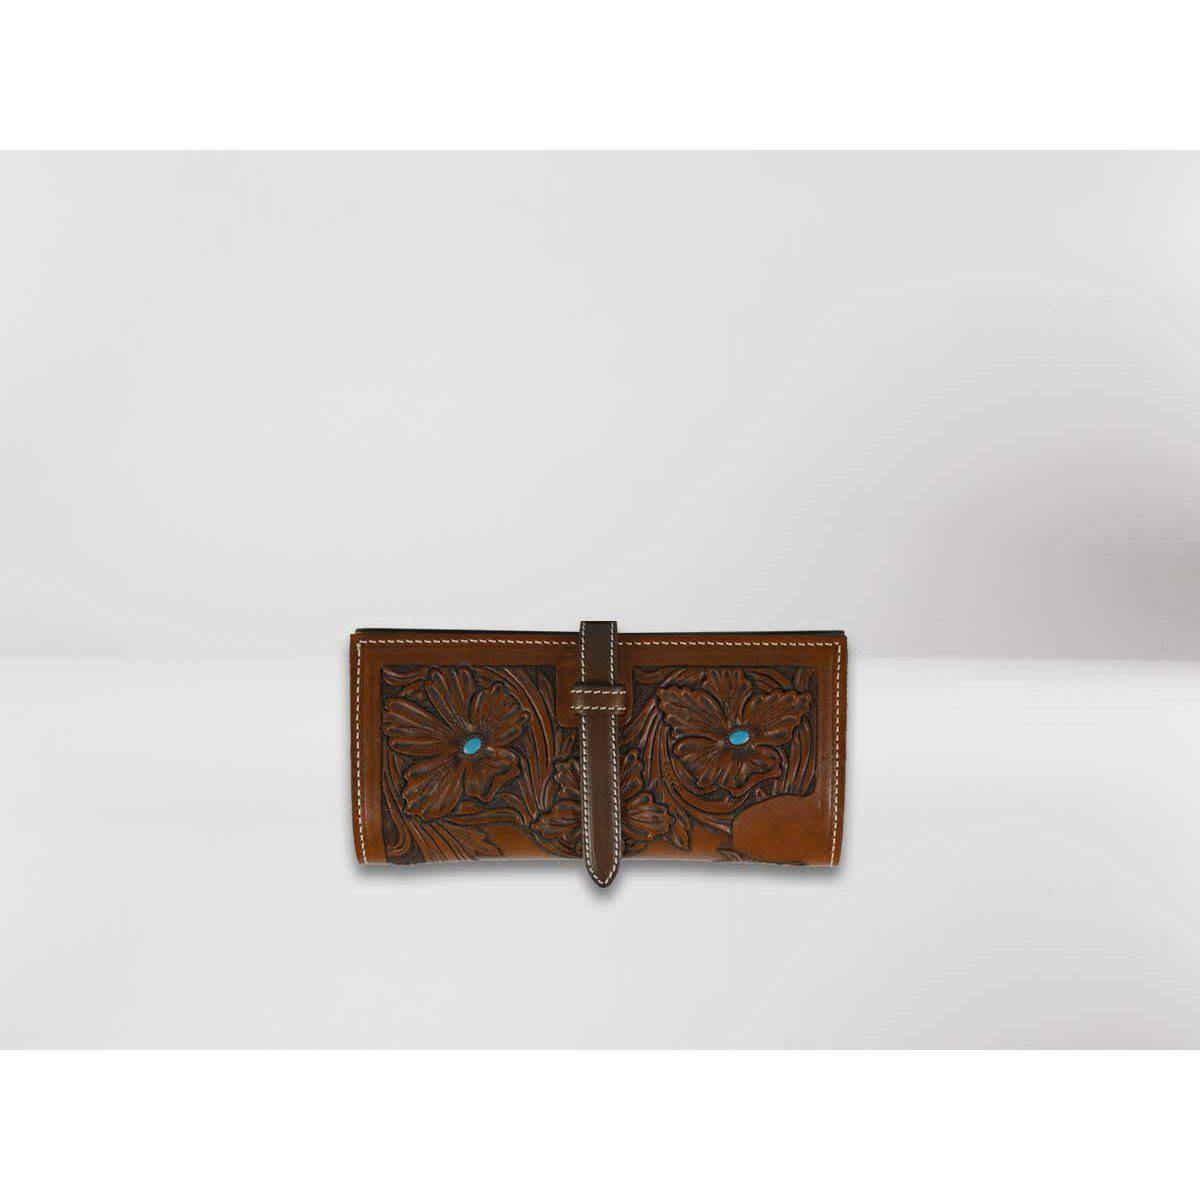 Constancia Women Clutch Bag Unisex Made in Italy Leather